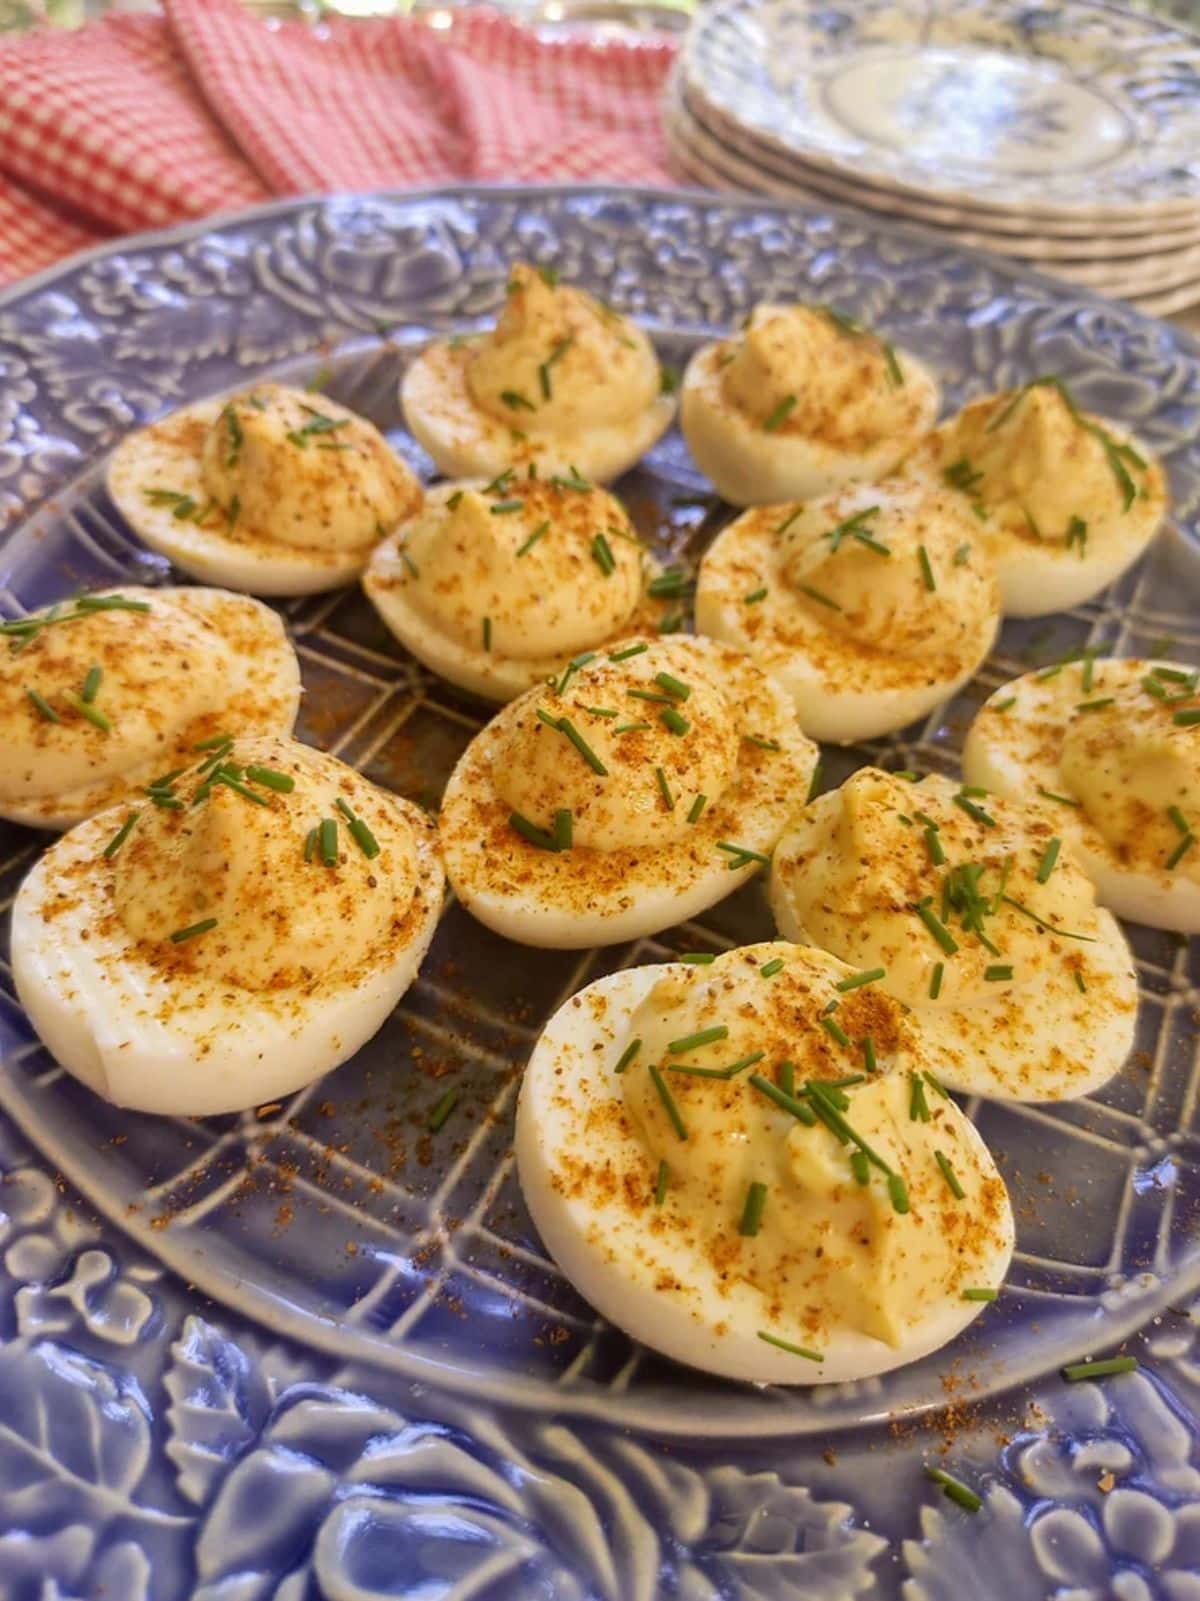 Tasty old bay deviled eggs on a tray.